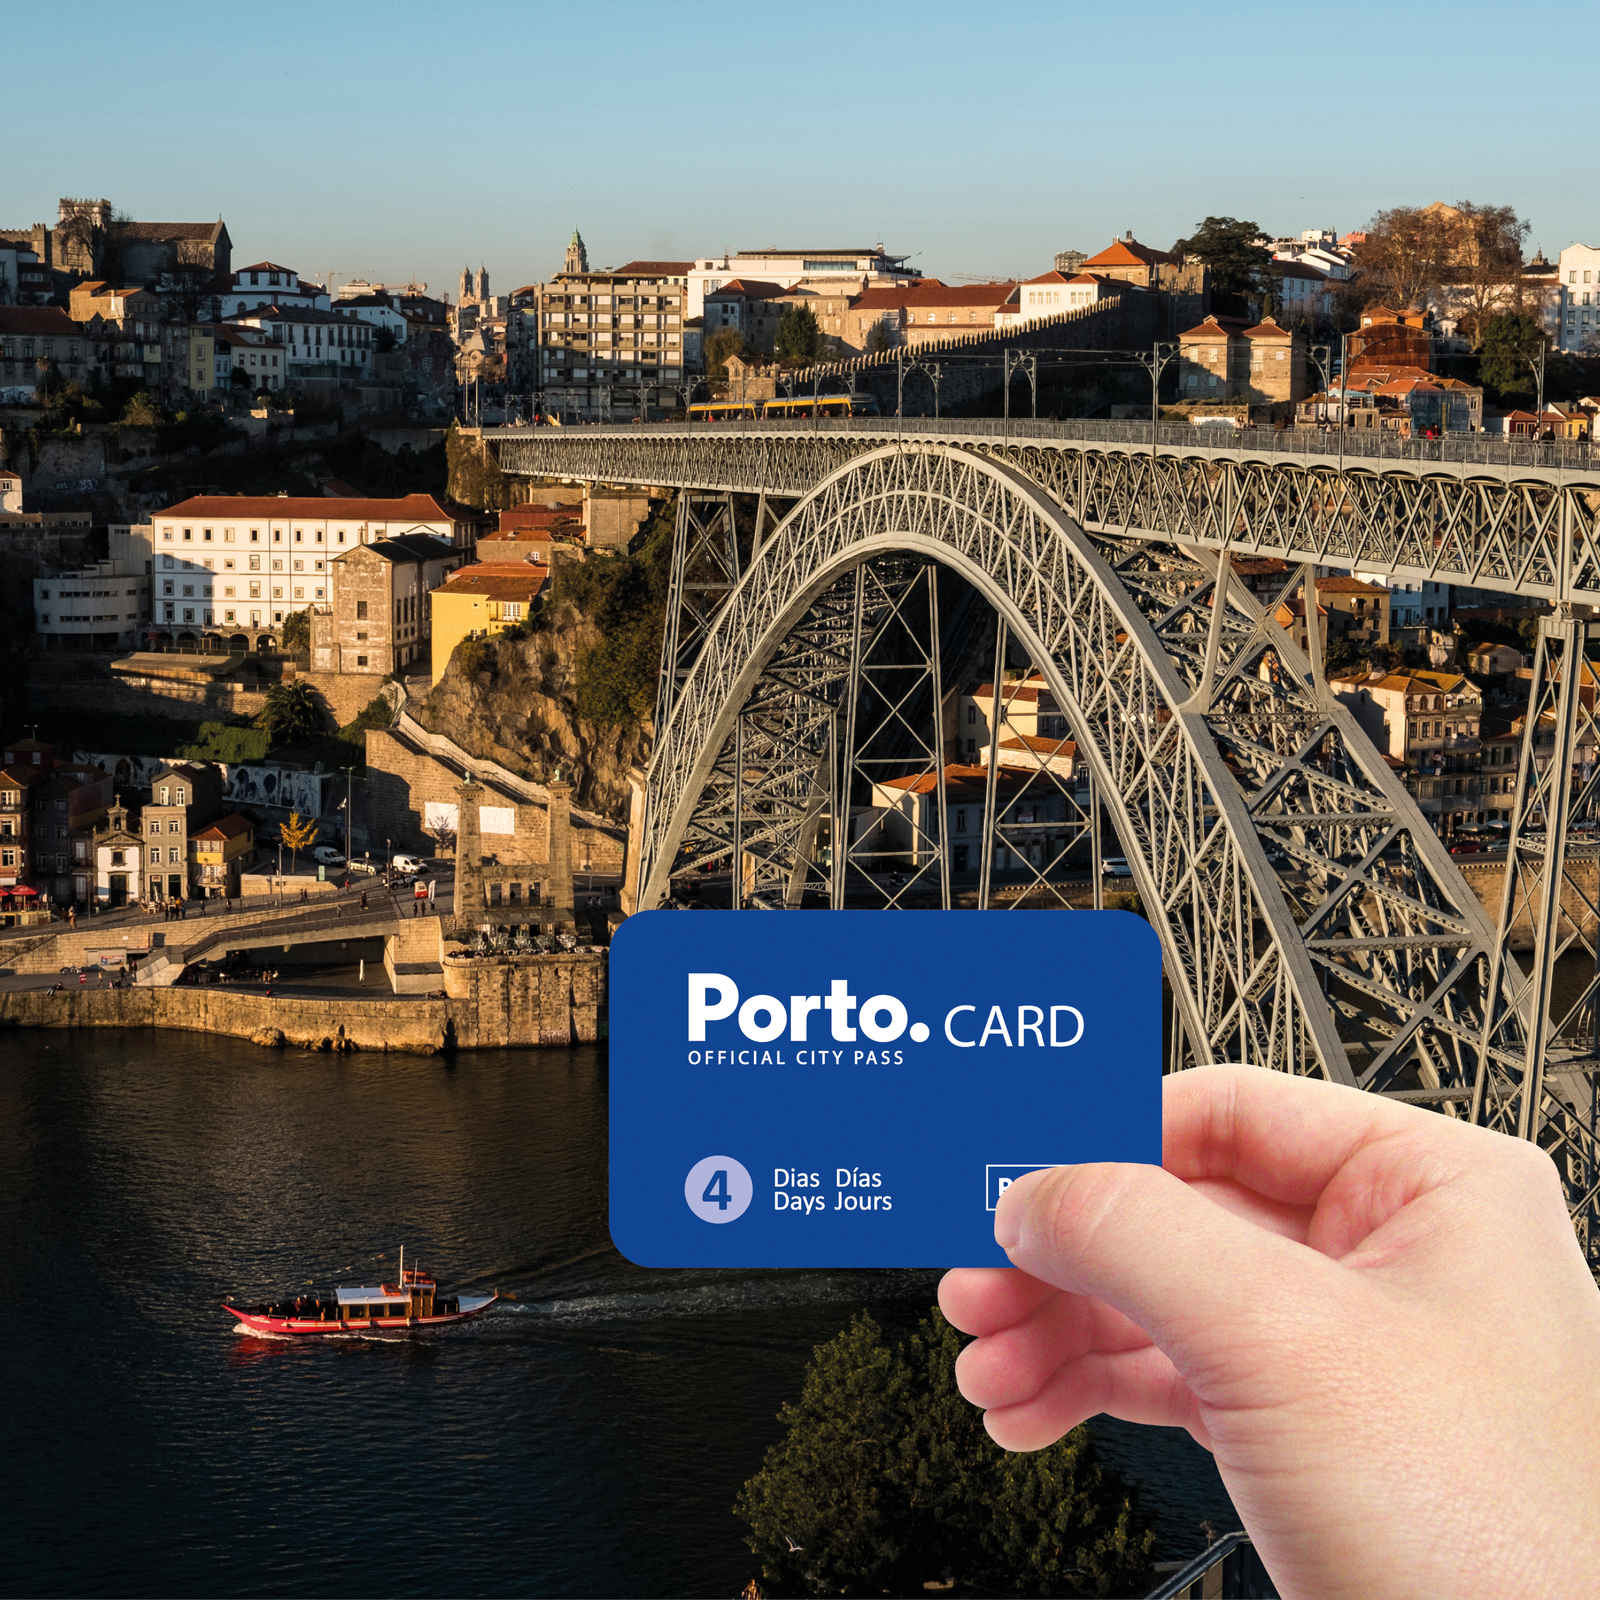 Porto Card: On Foot in Portugal